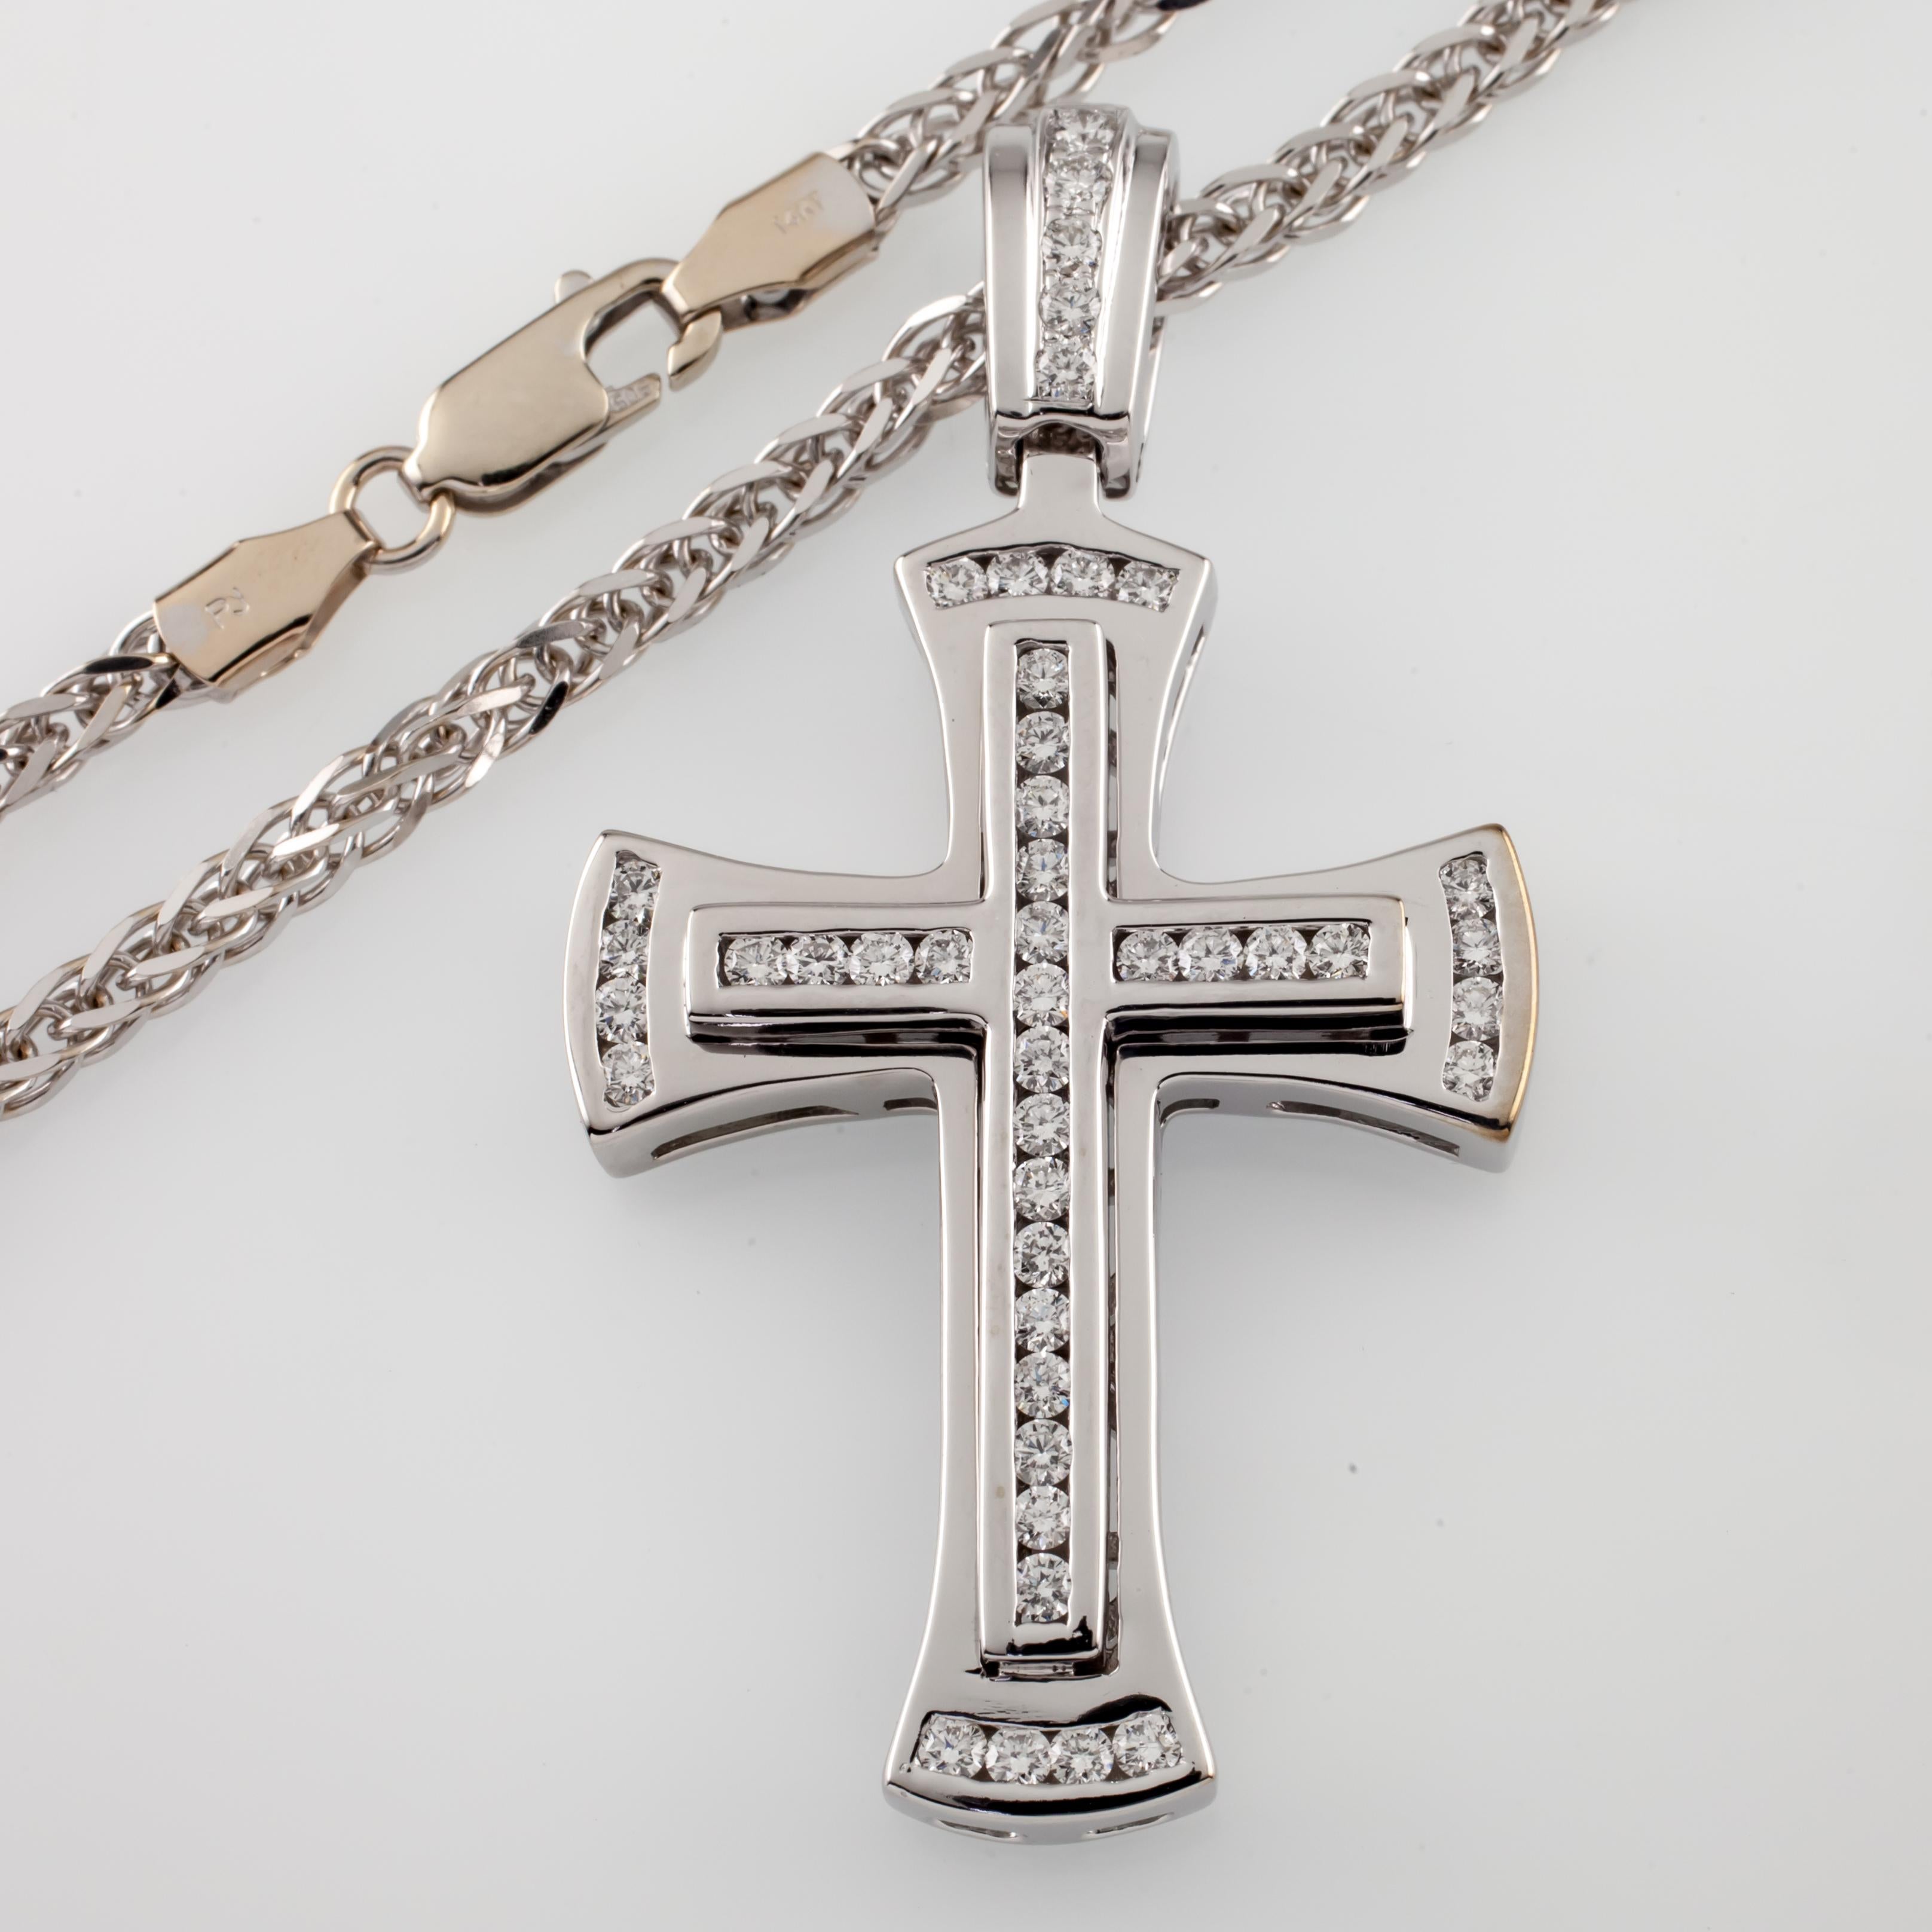 Gorgeous 14k White Gold Cross
Features Intersecting Rows of Channel-Set Round Diamonds
Each Point of Cross Features Rounded Row of Channel-Set Diamonds
Total Diamond Weight = 1.30 ct
Average Color = F
Average Clarity = VS/SI Clarity
Includes 24